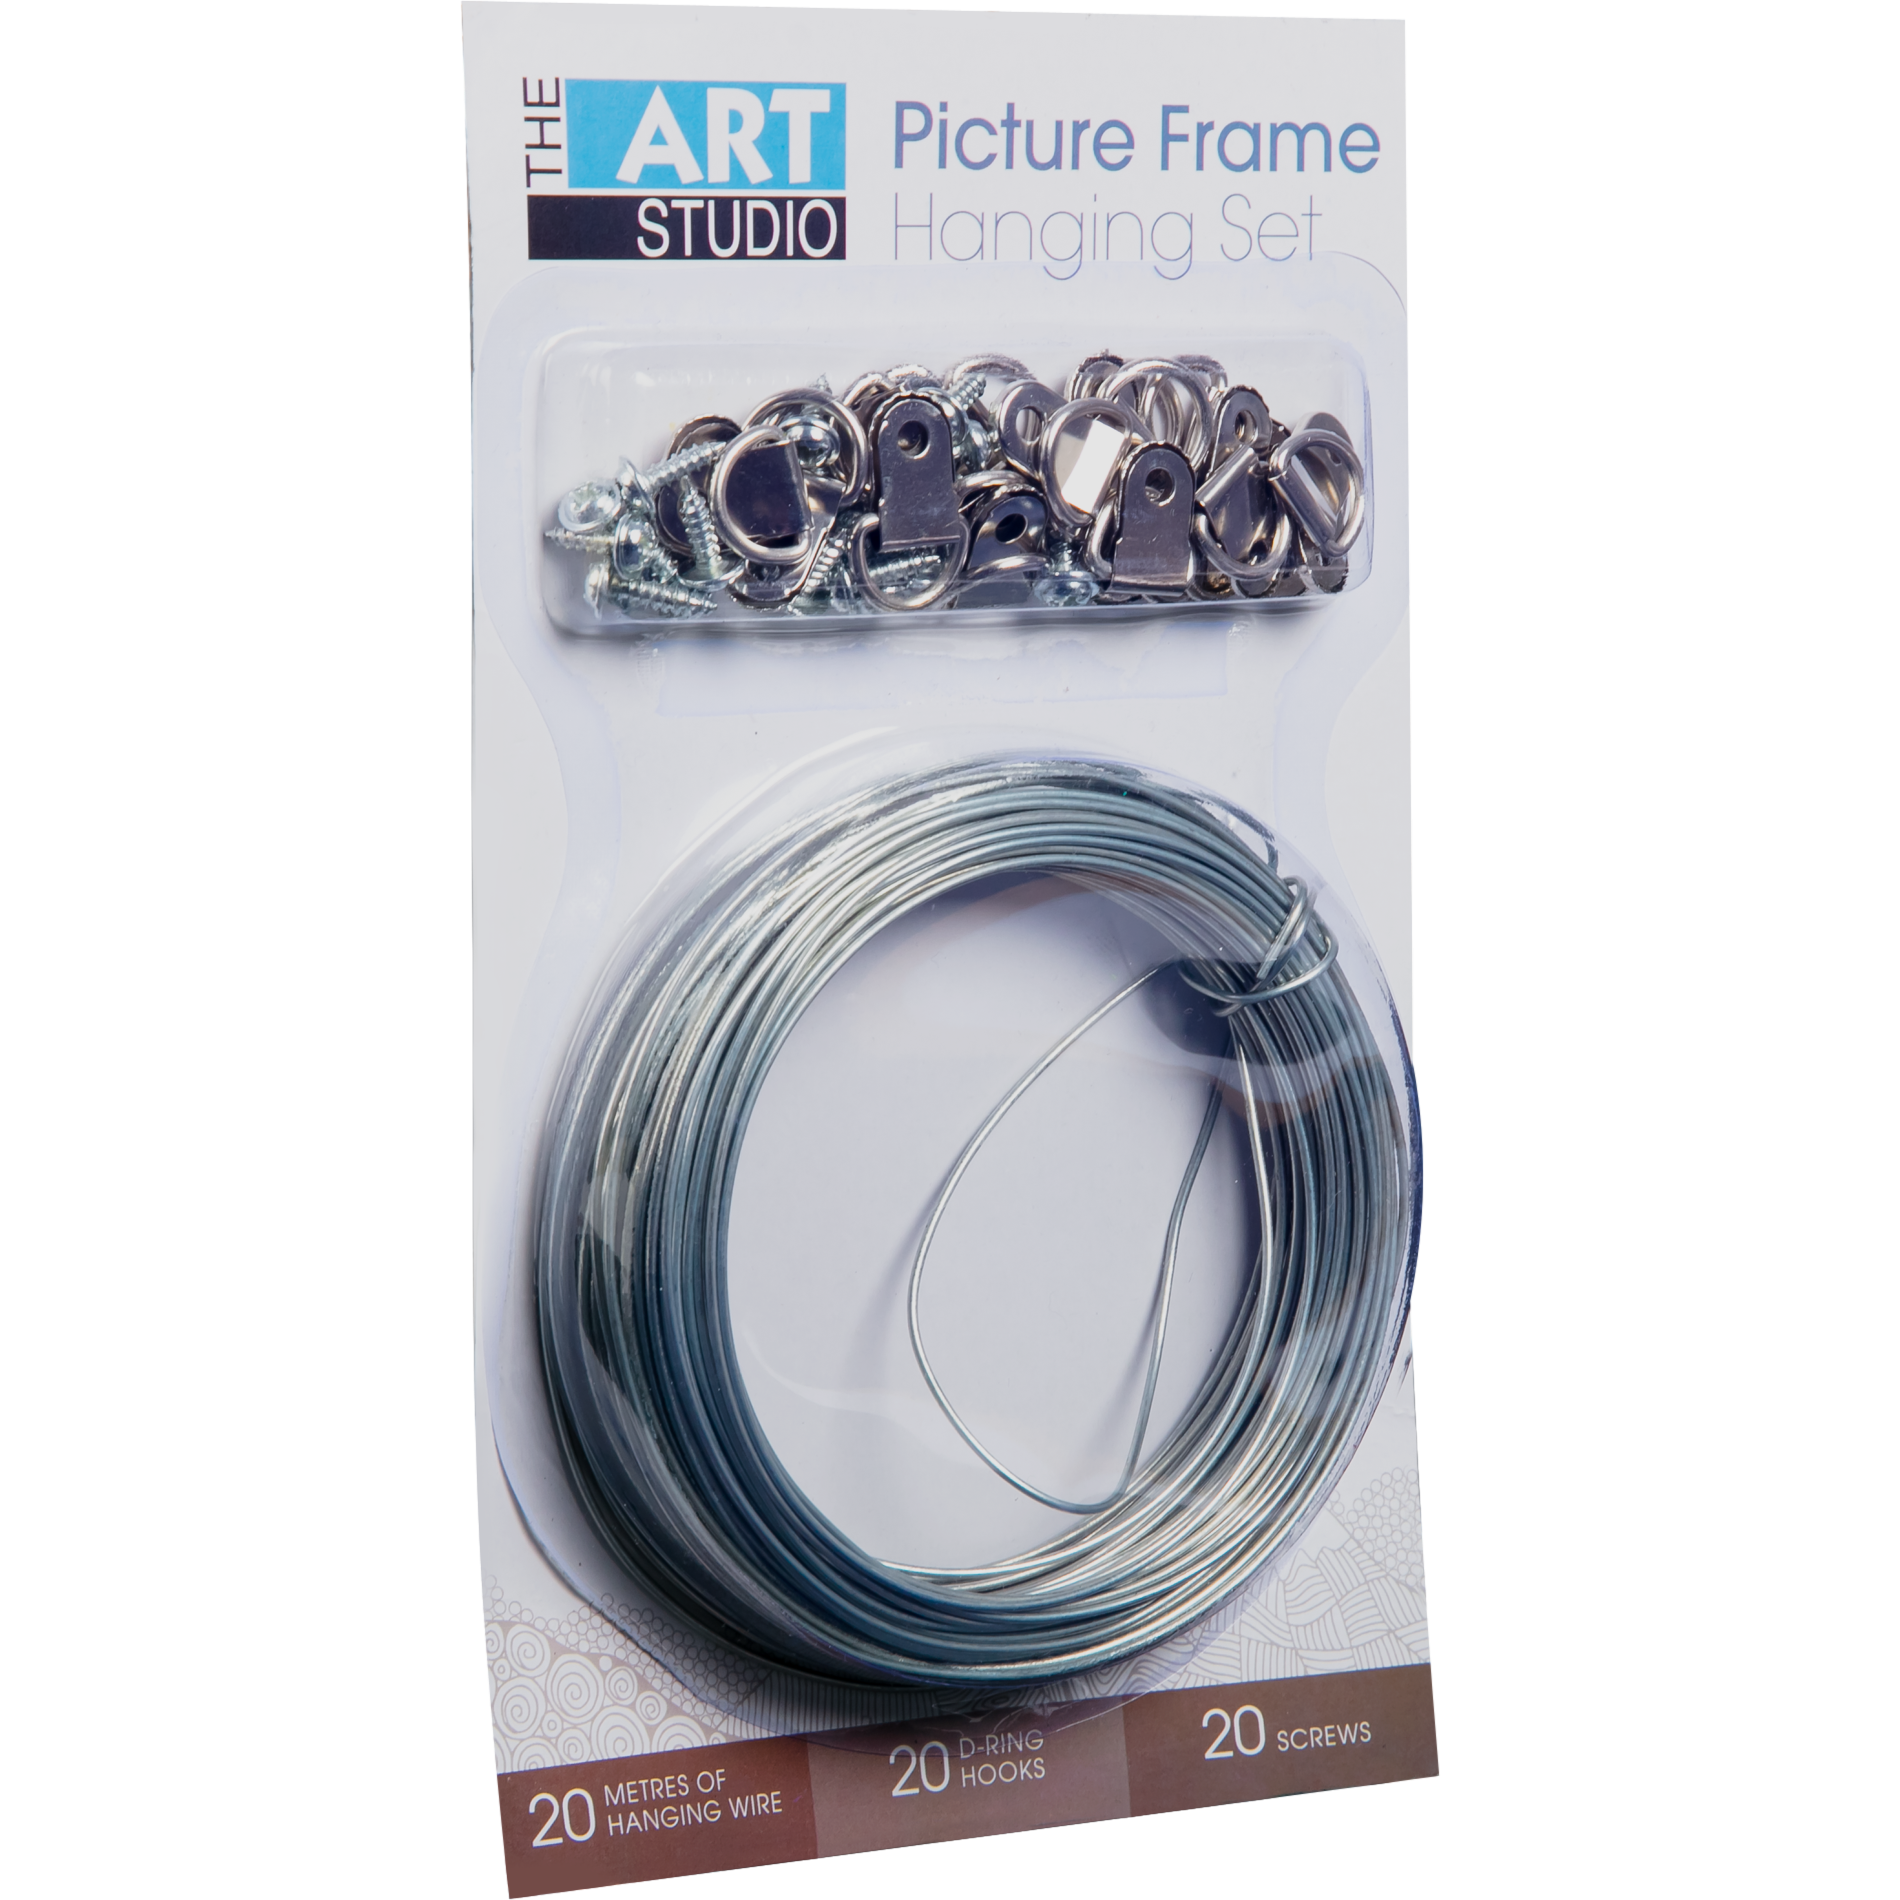 Image of Art Studio Picture Hanging Set Includes 20 D-Ring Hooks, 20 Screws and 20 metres of Hanging Wire